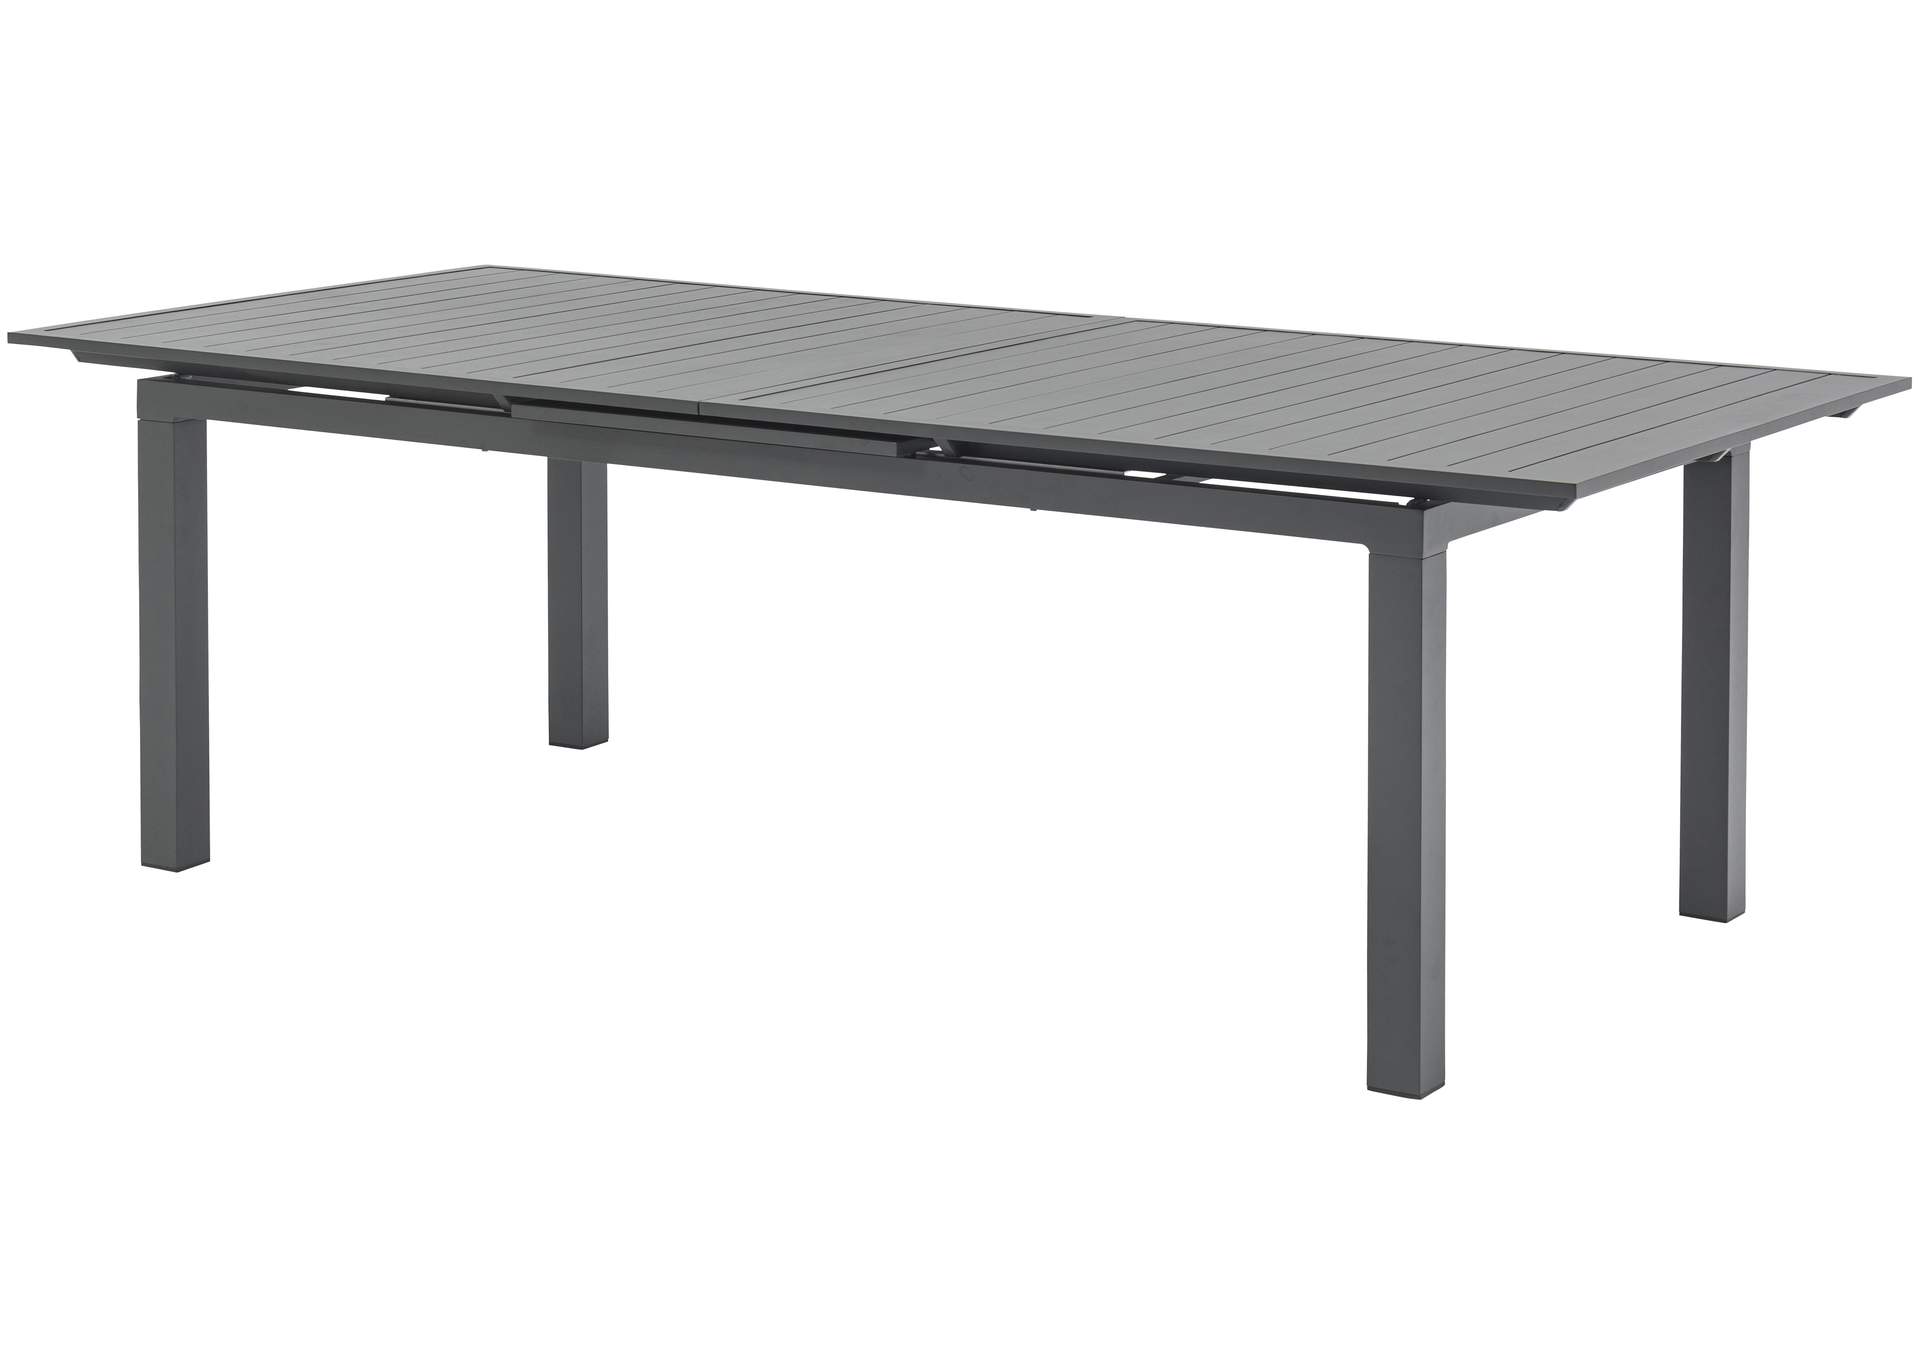 Maldives Outdoor Patio Dining Table,Meridian Furniture